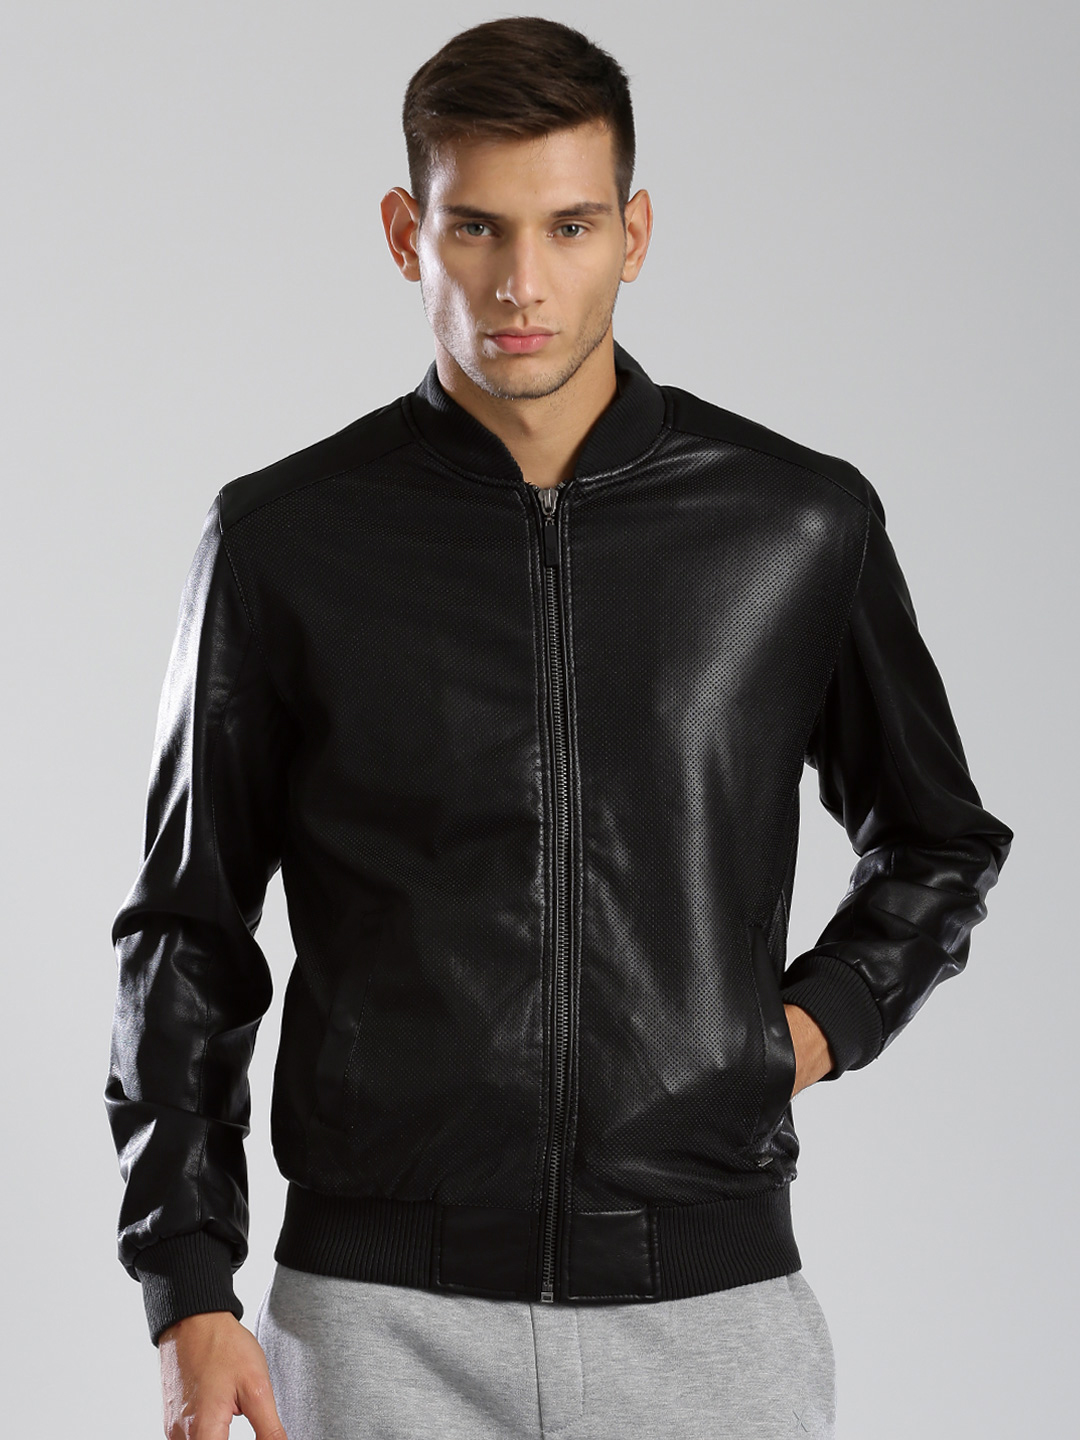 Hrx Jackets - Buy Hrx Jackets online in India